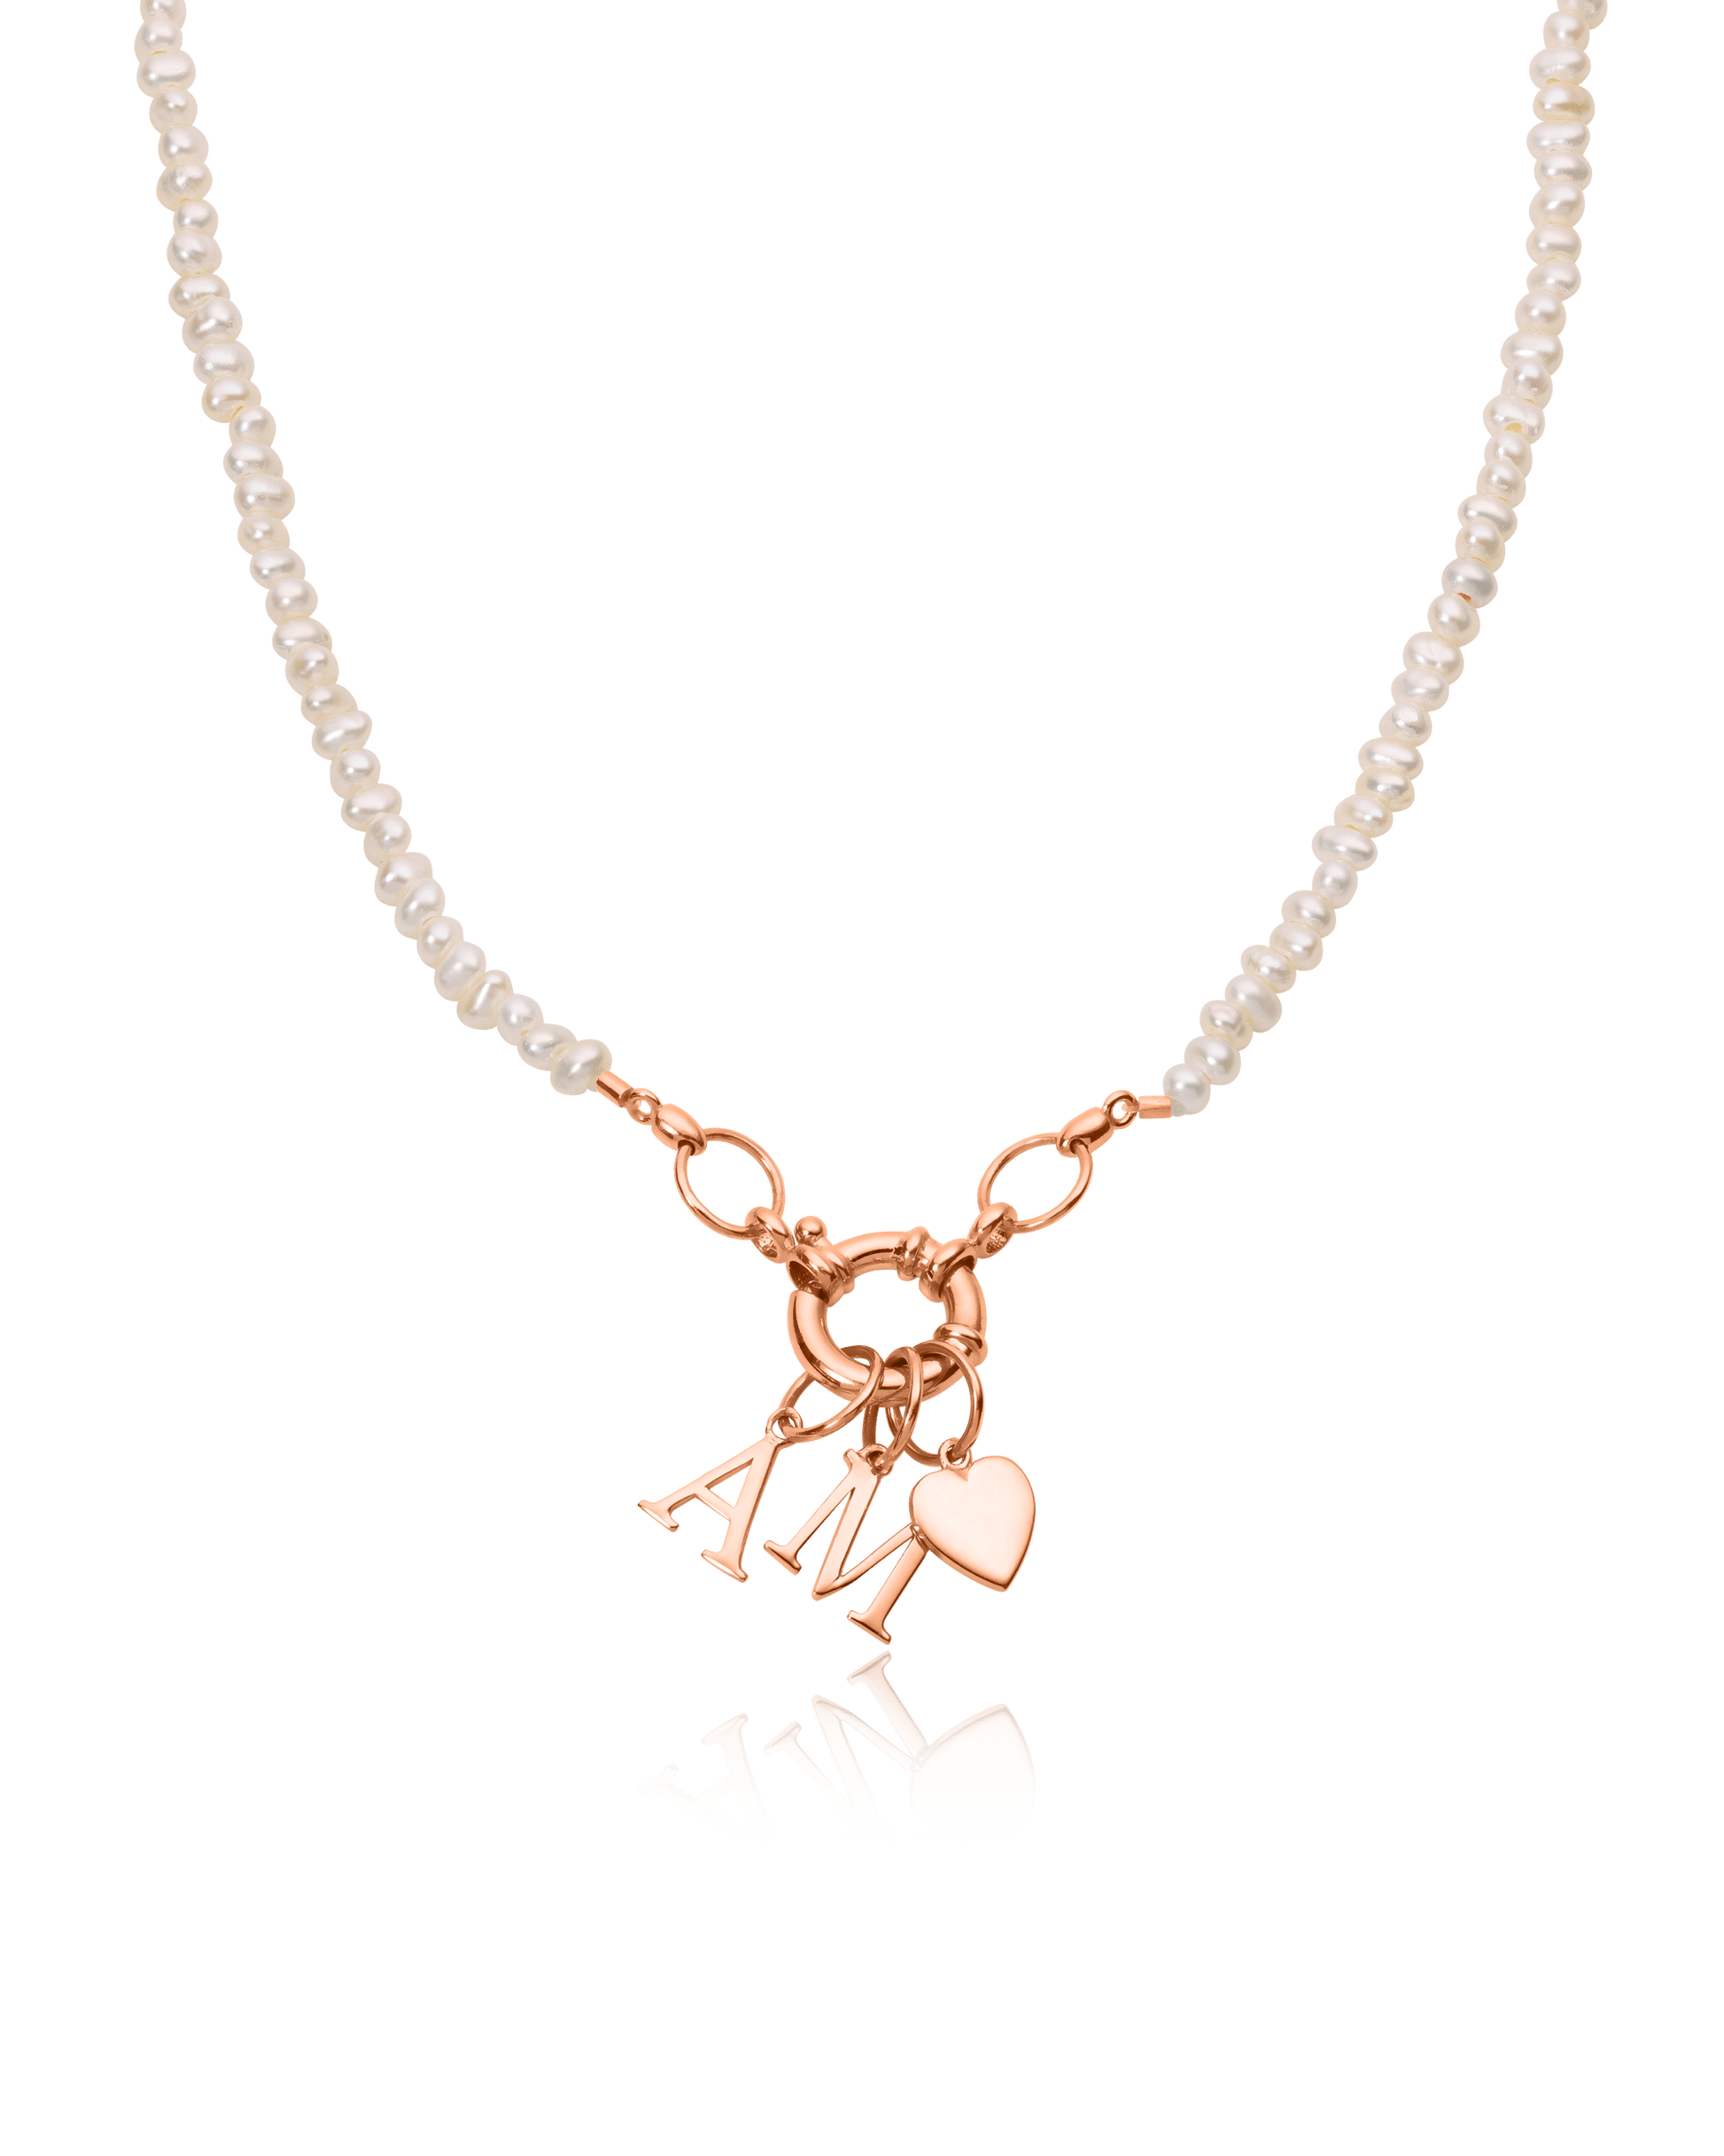 Black Spinnel Charm Lock Necklace - 18K Rose Vermeil Necklaces magal-dev Pearl (OUT OF STOCK) 1 Charm 16"